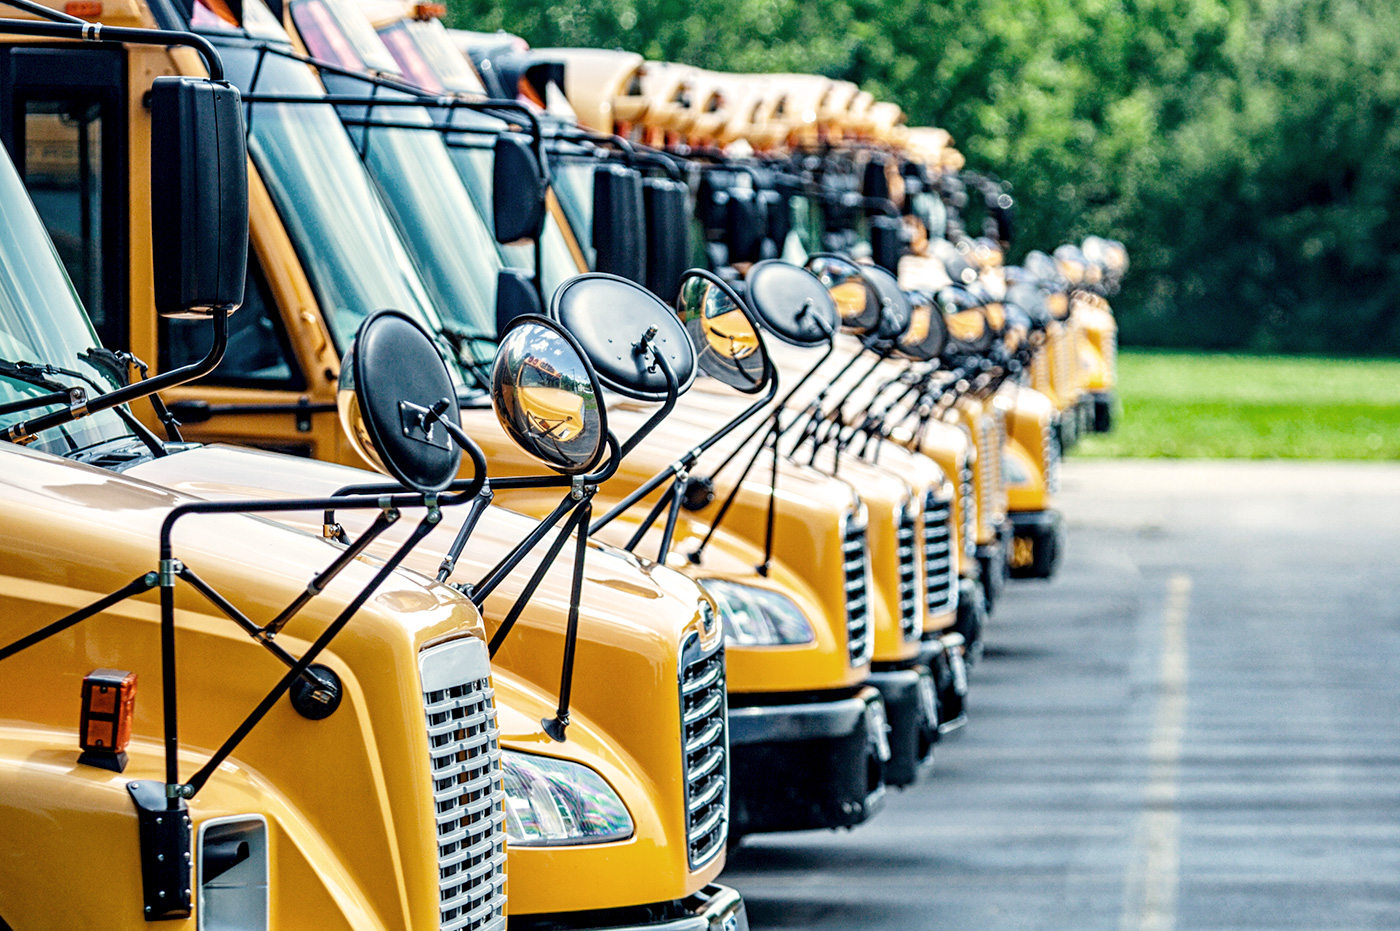 School buses lined up in a parking lot.